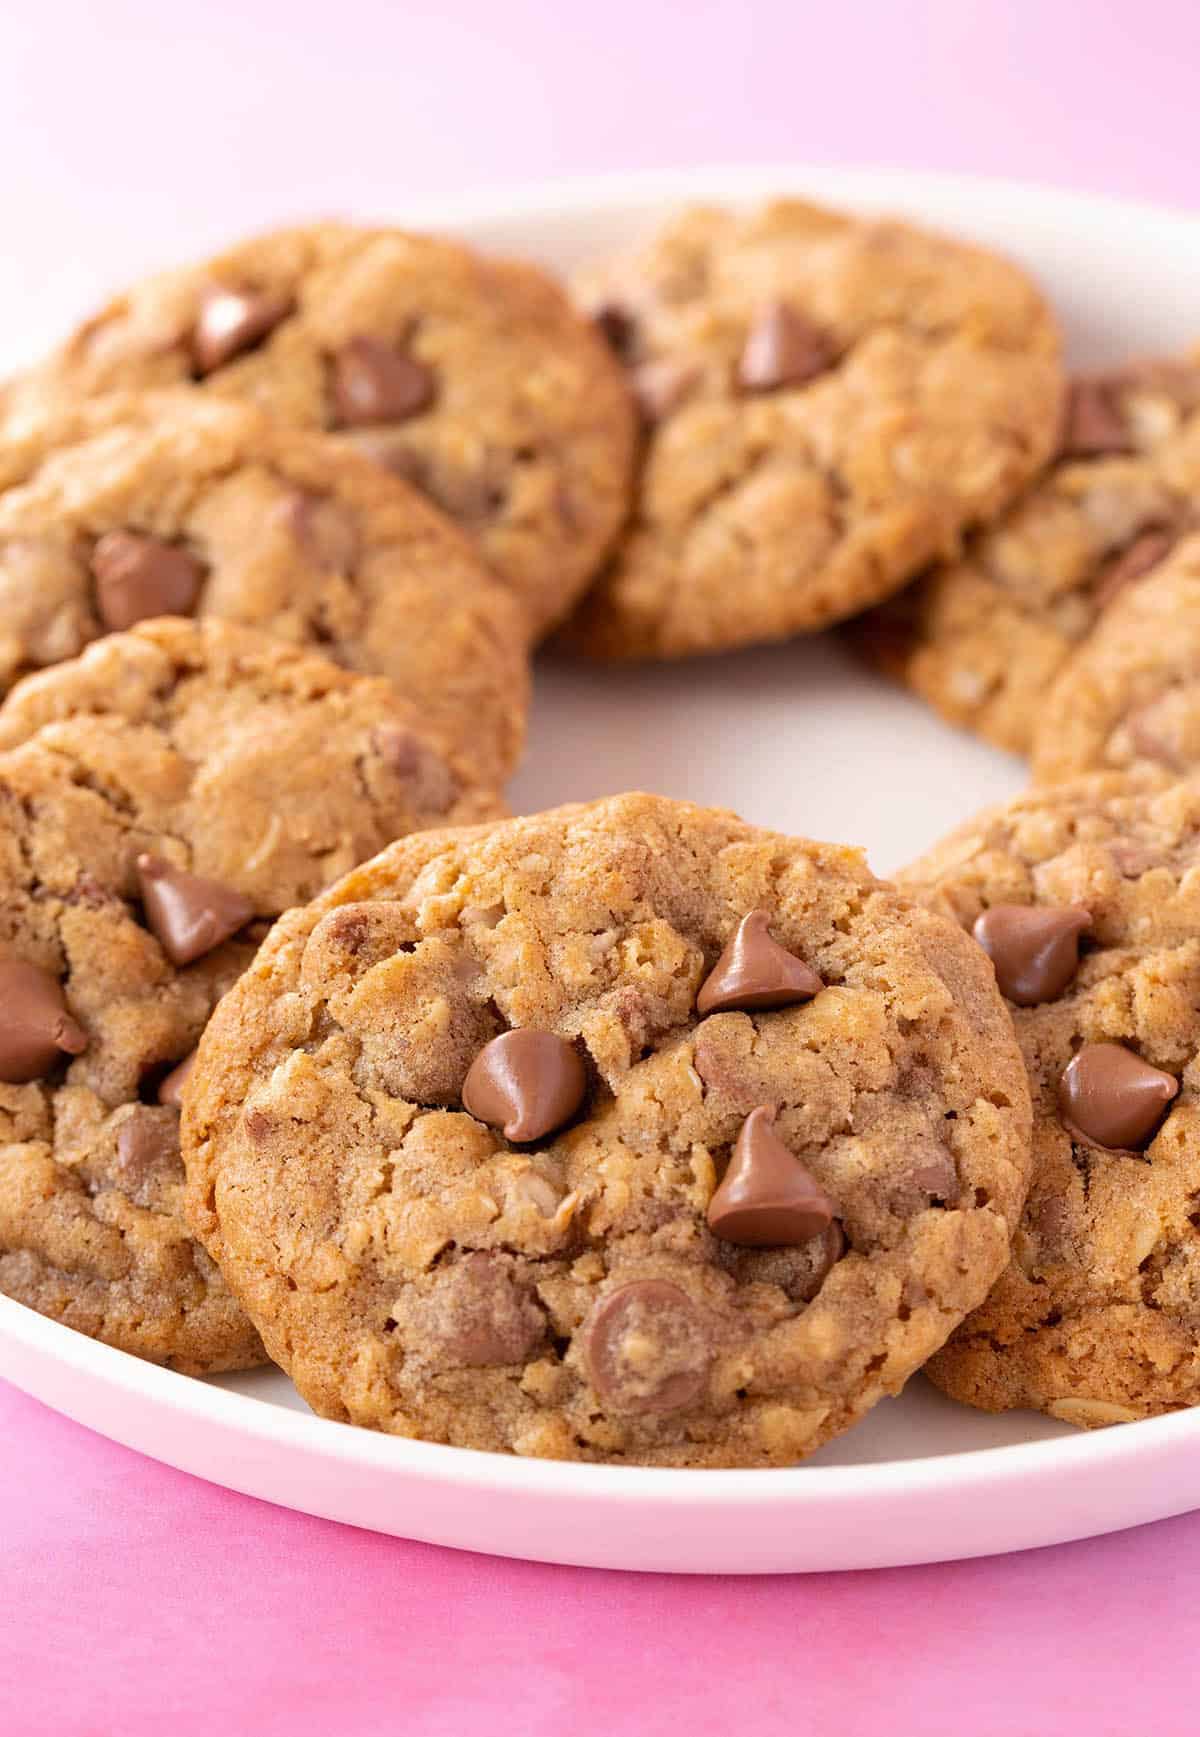 A plate of homemade Oatmeal Chocolate Chip Cookies sitting on a pink background.